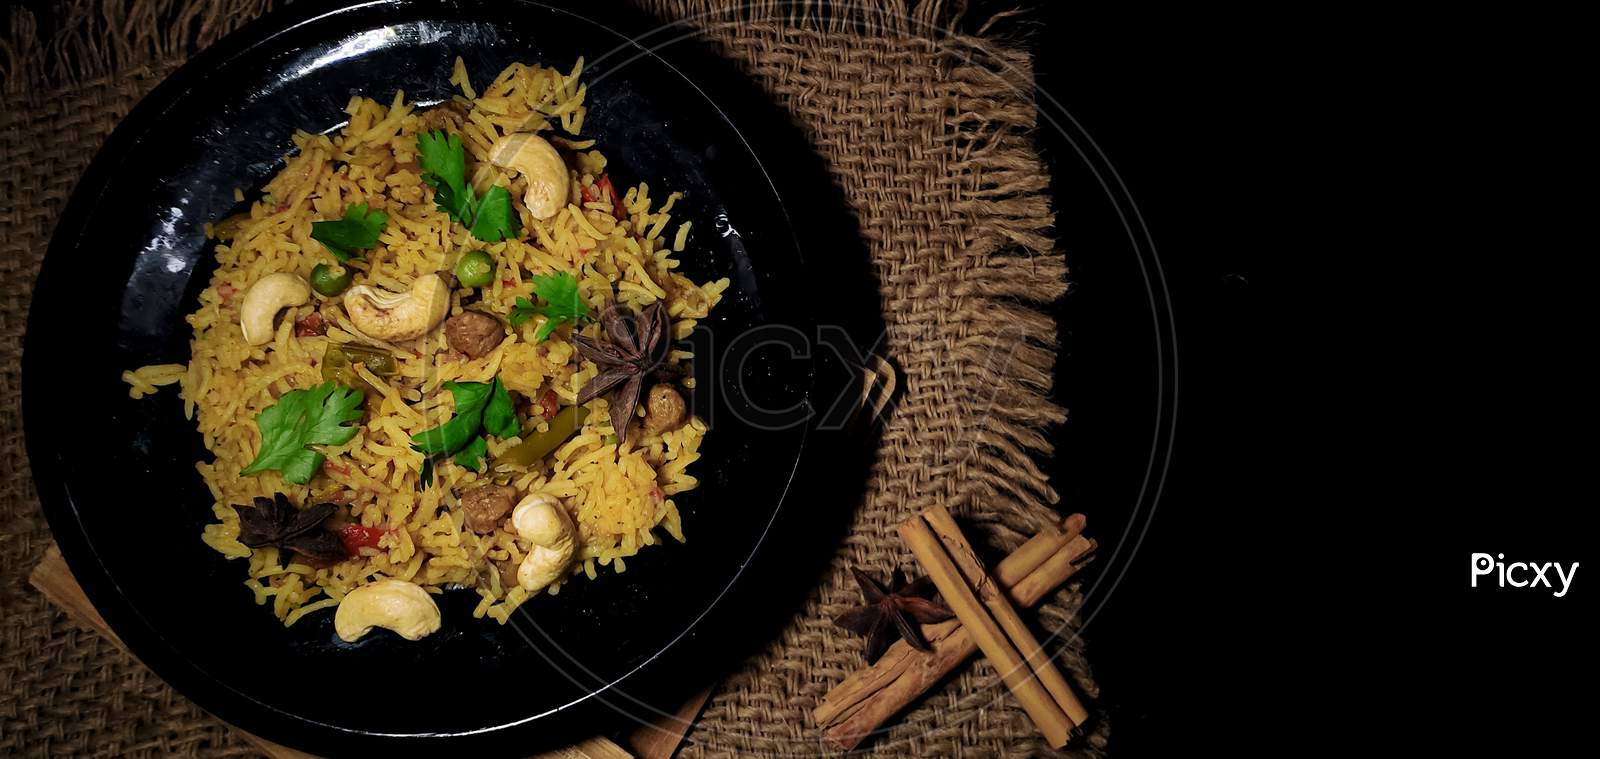 Delicious Homemade Pulao or vegetable briyani or Vegetable Rice made with Basmati rice, vegetable and spices isolated in a Black dark background with copy space.